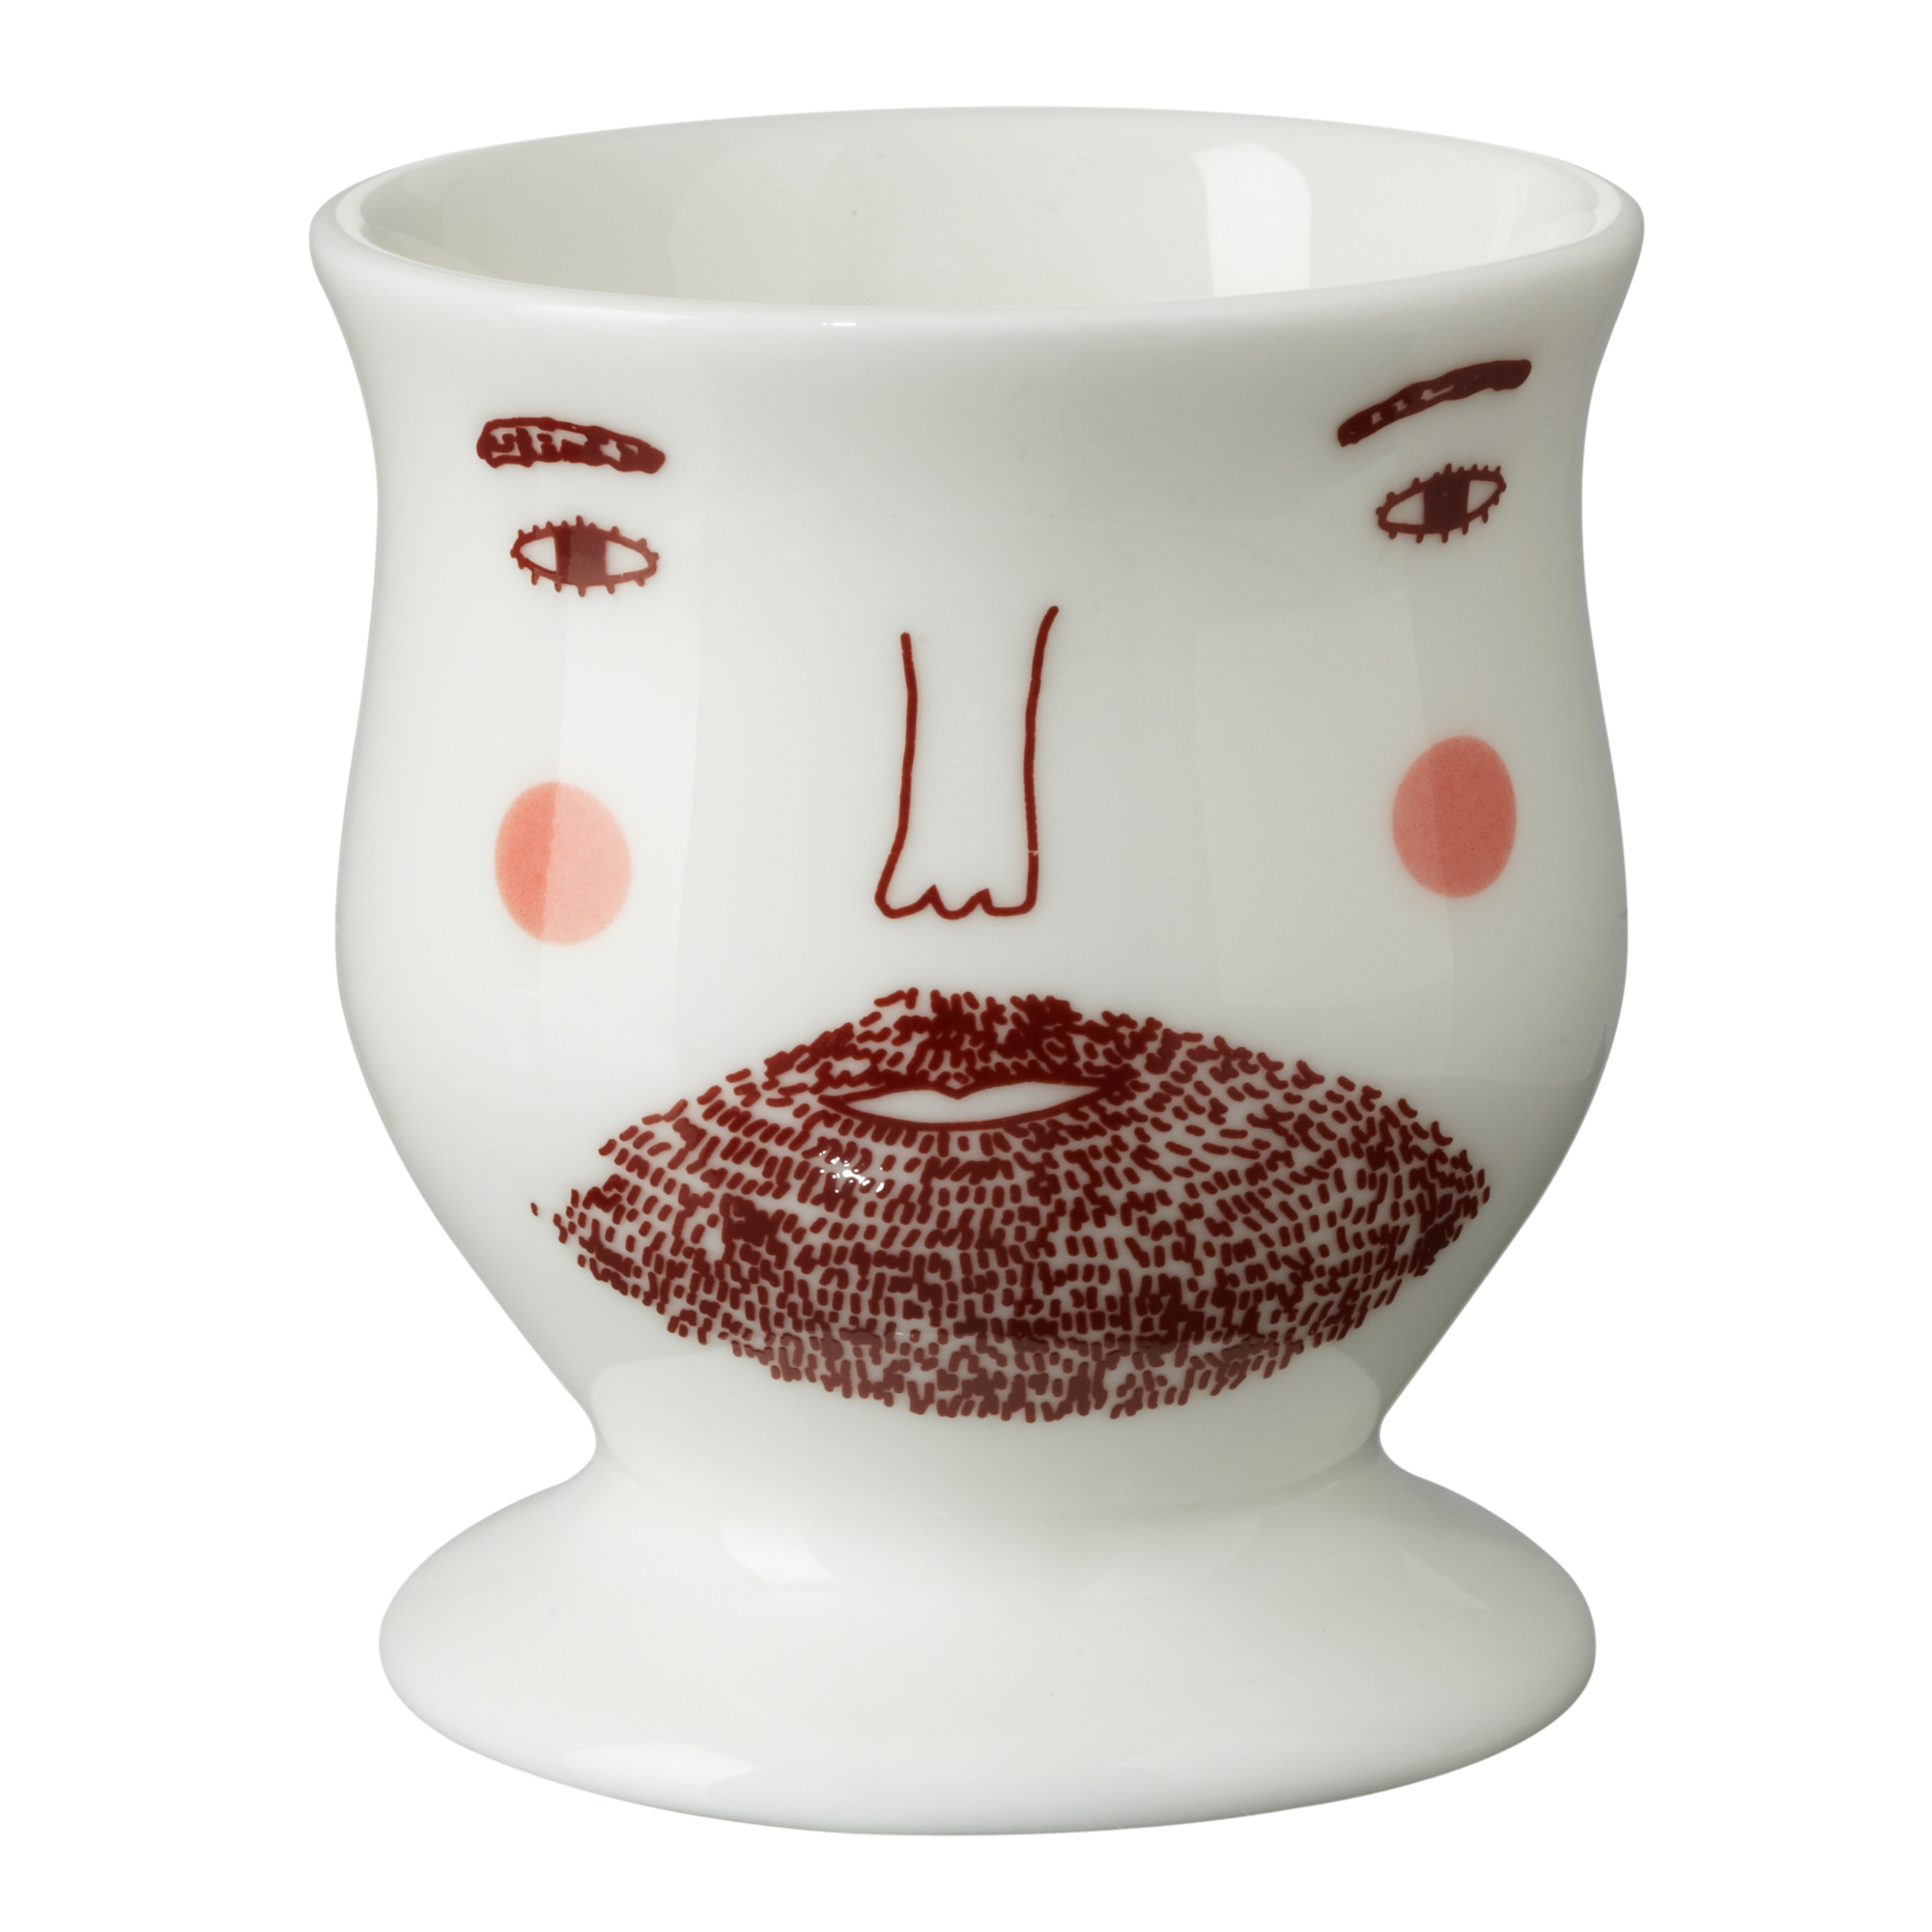 Beardy Man Egg Cup by Donna Wilson - 100% Bone China, made in UK